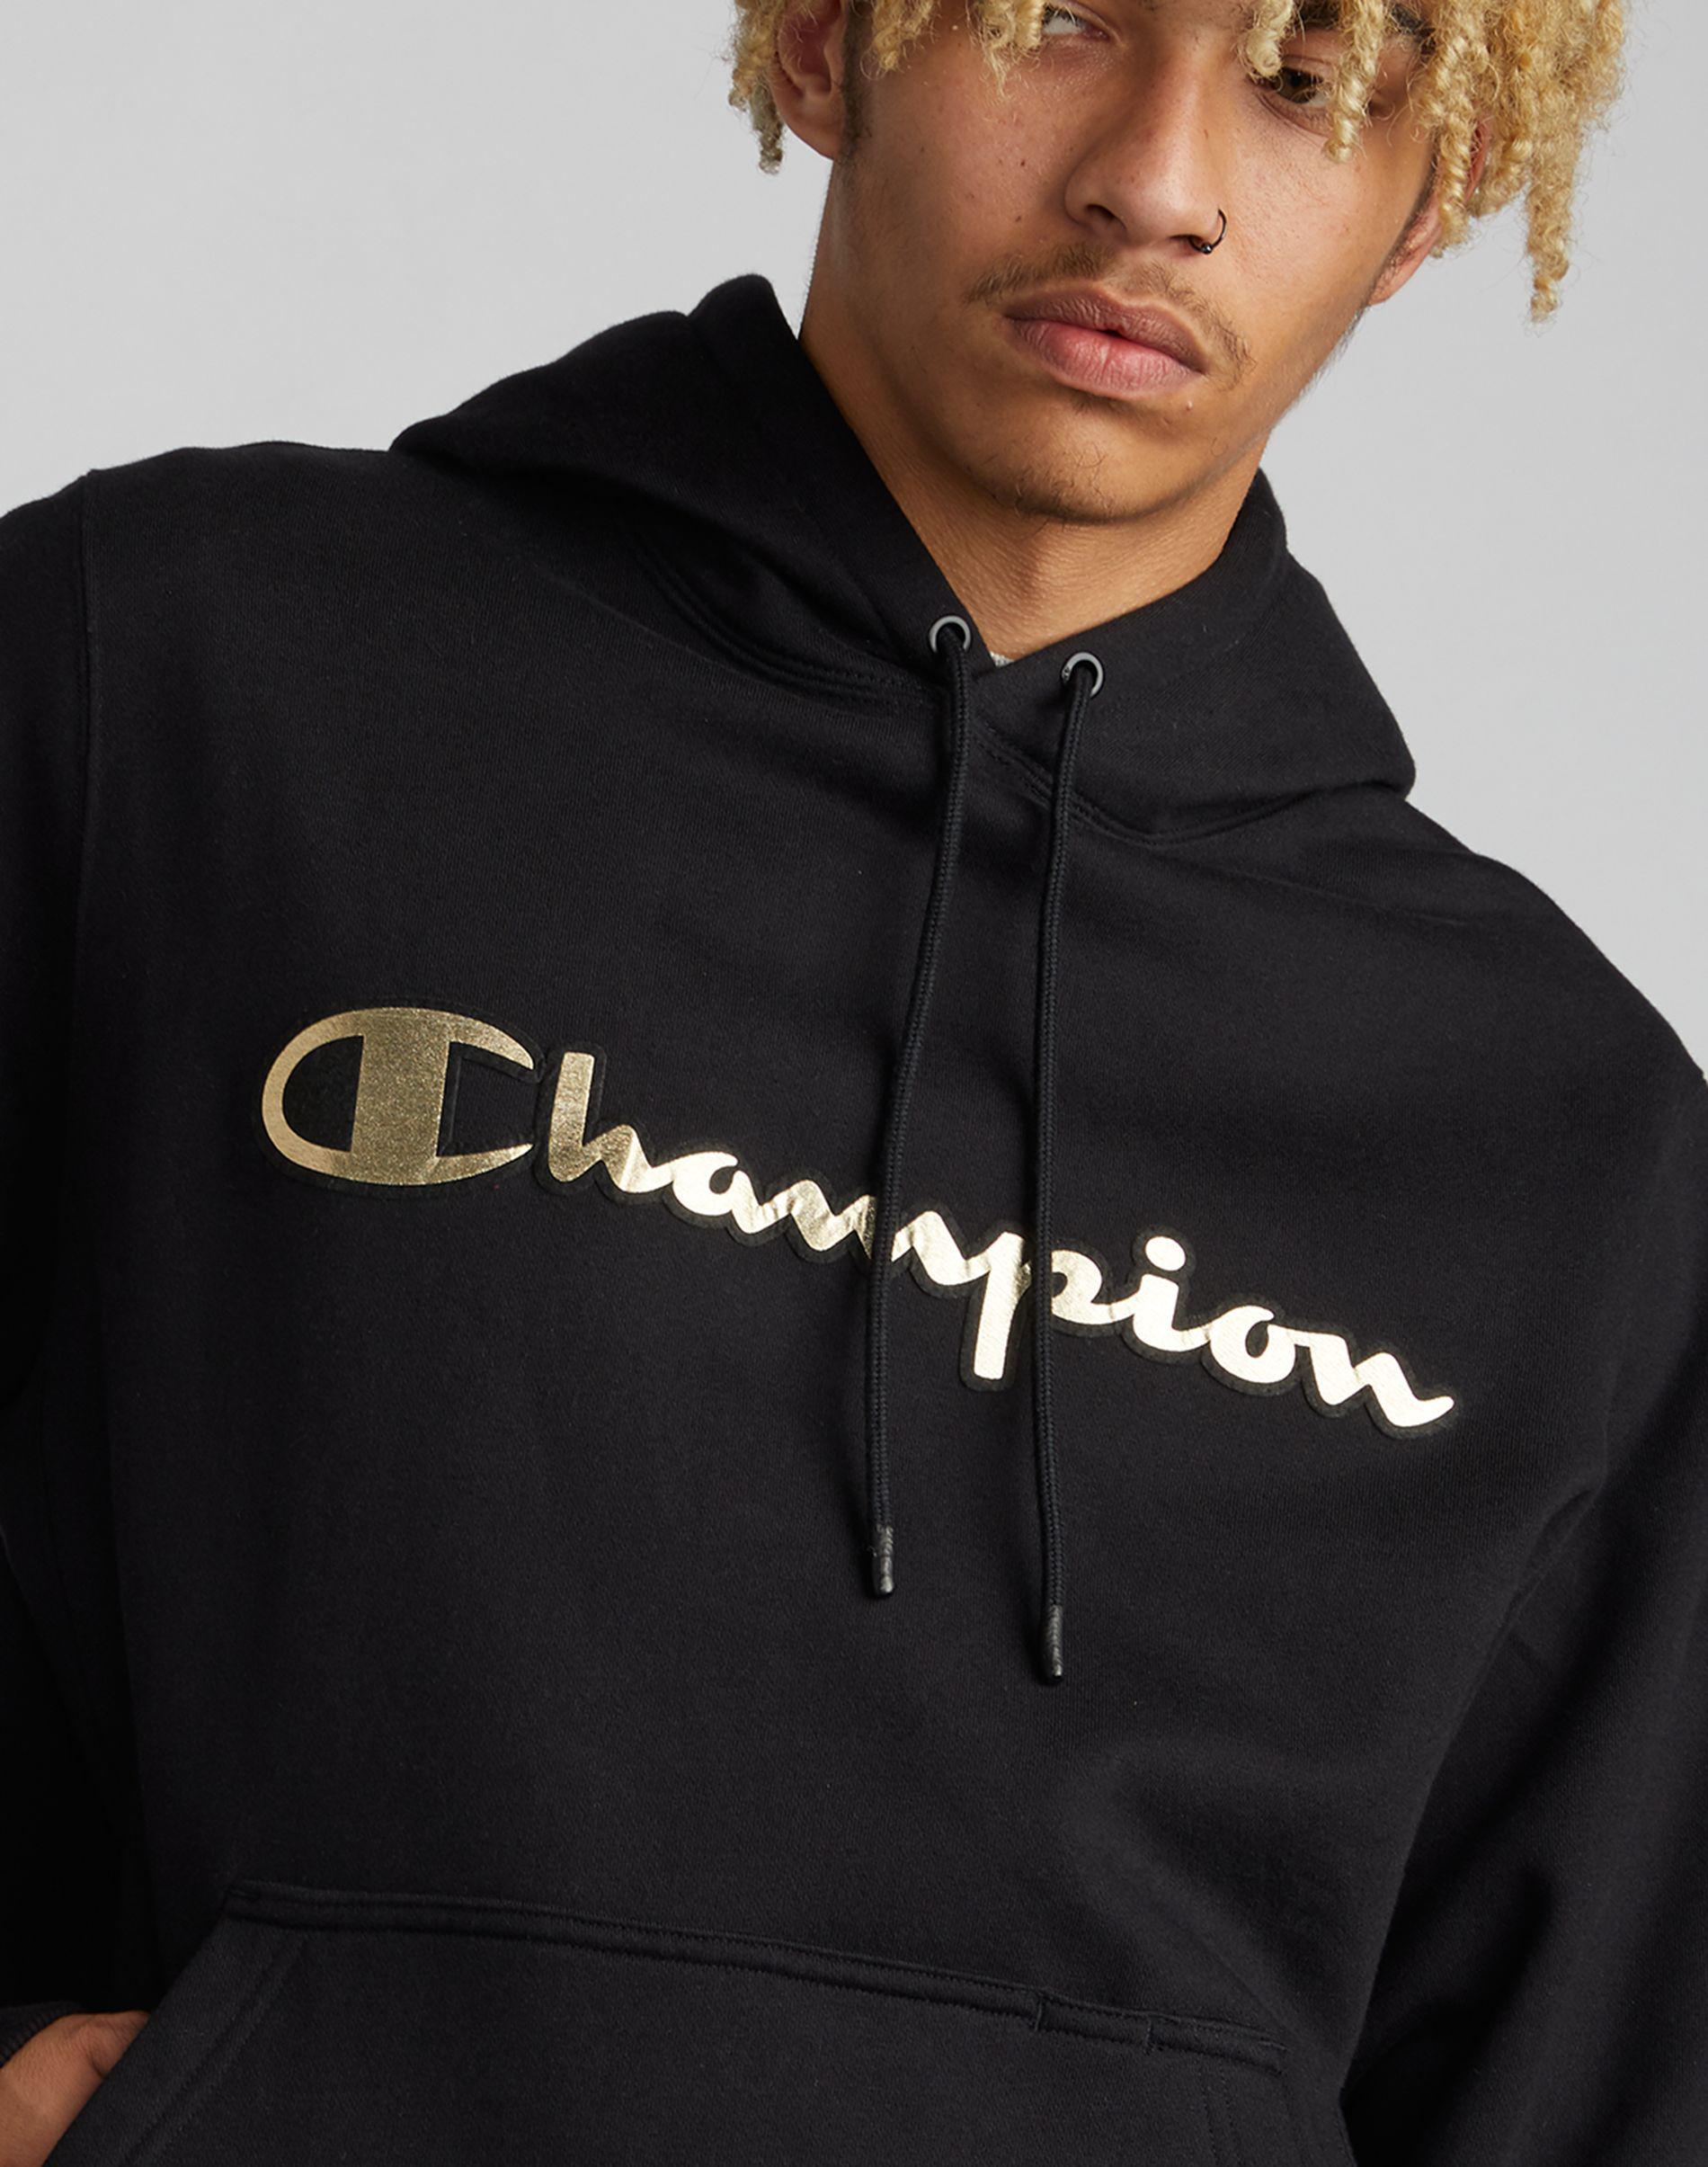 black and gold champion sweater